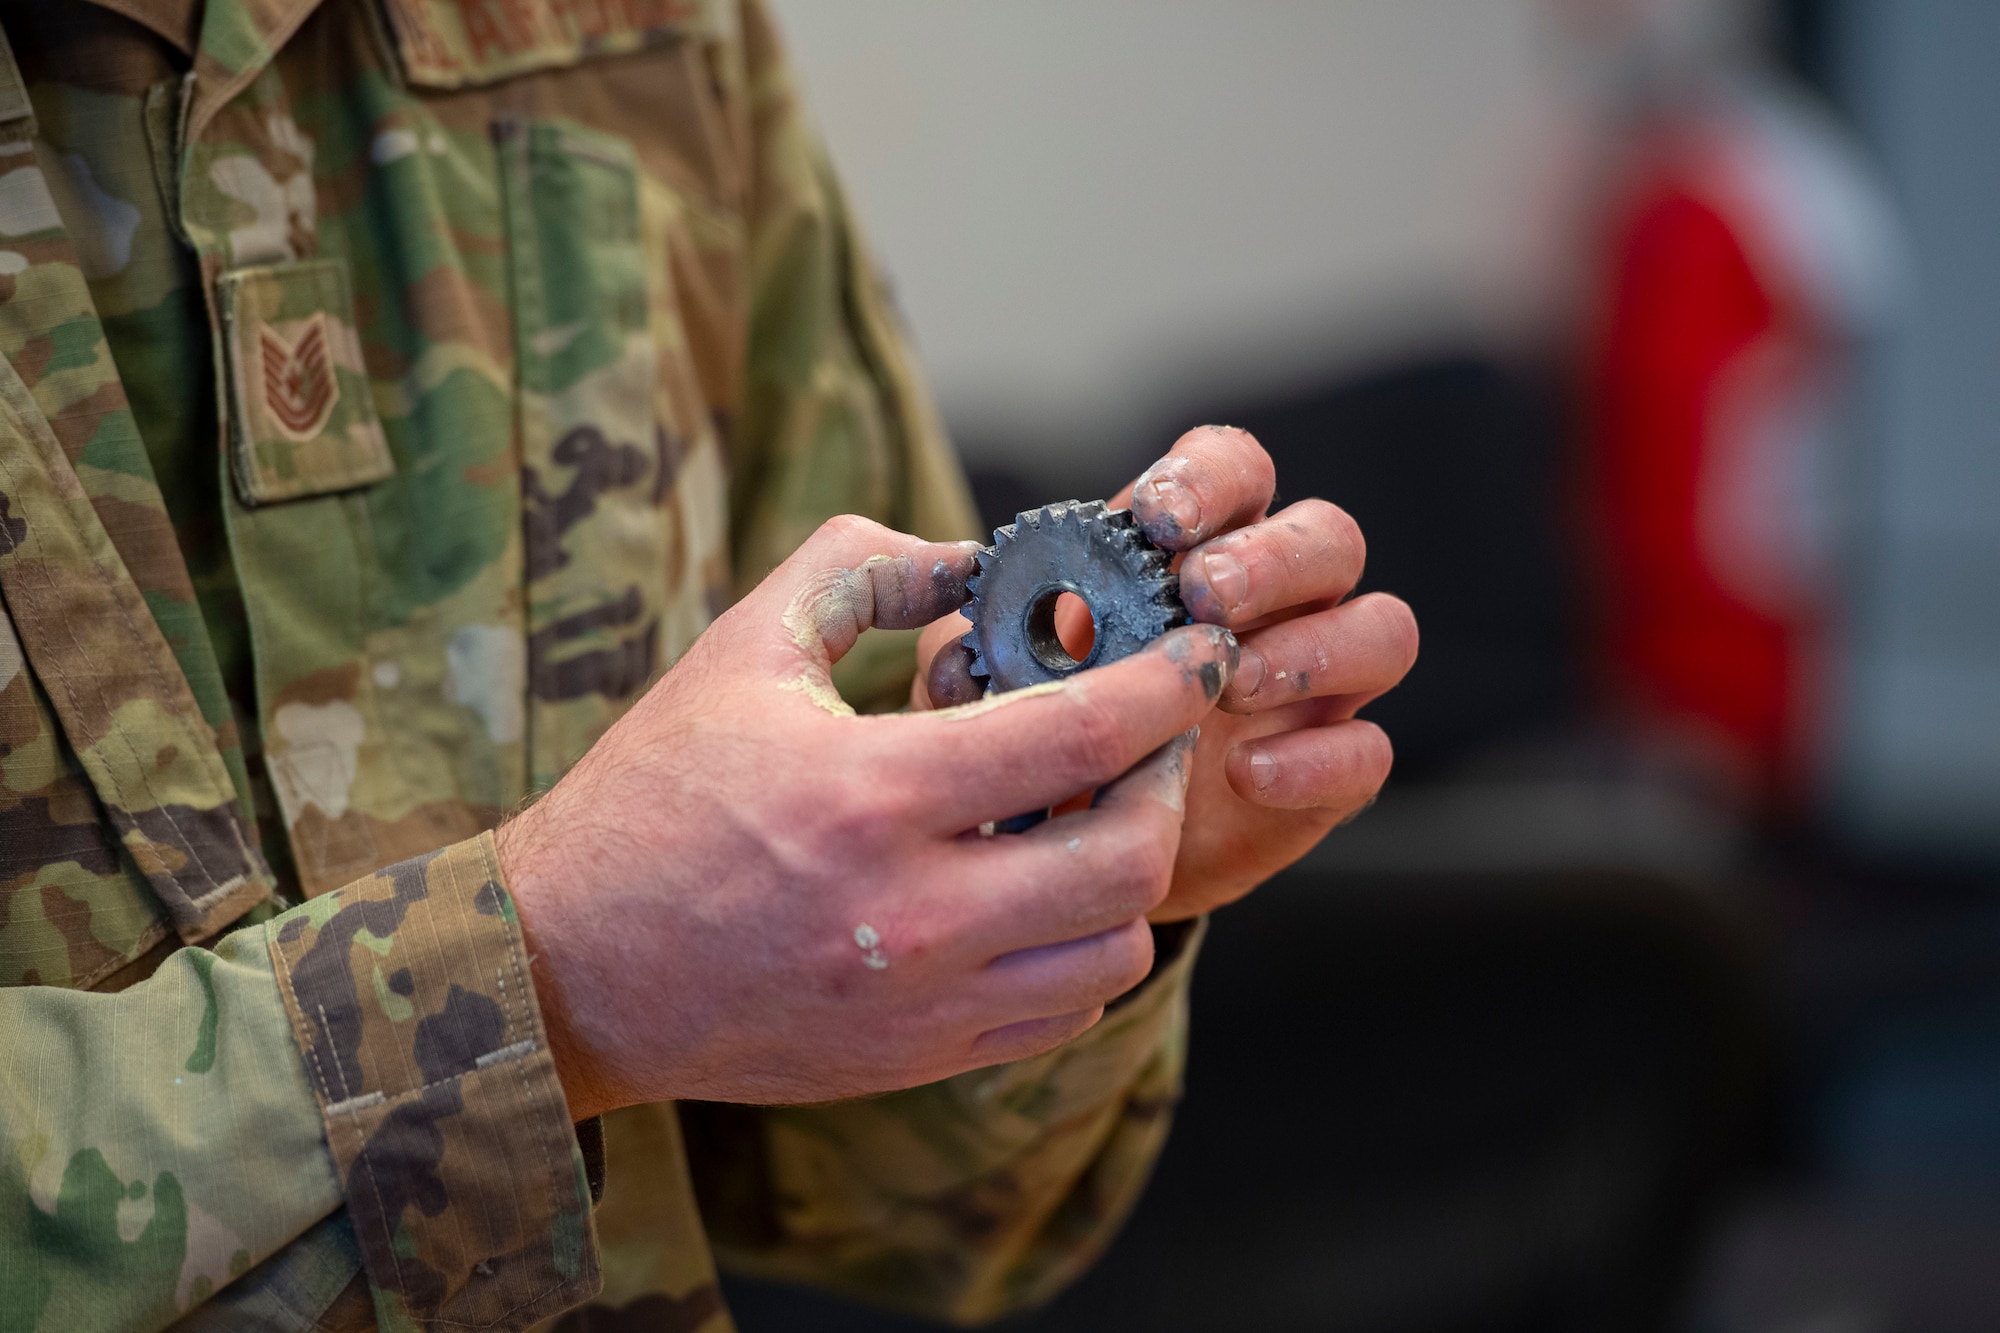 Members of Army Reserve and Air National Guard innovate through collaboration